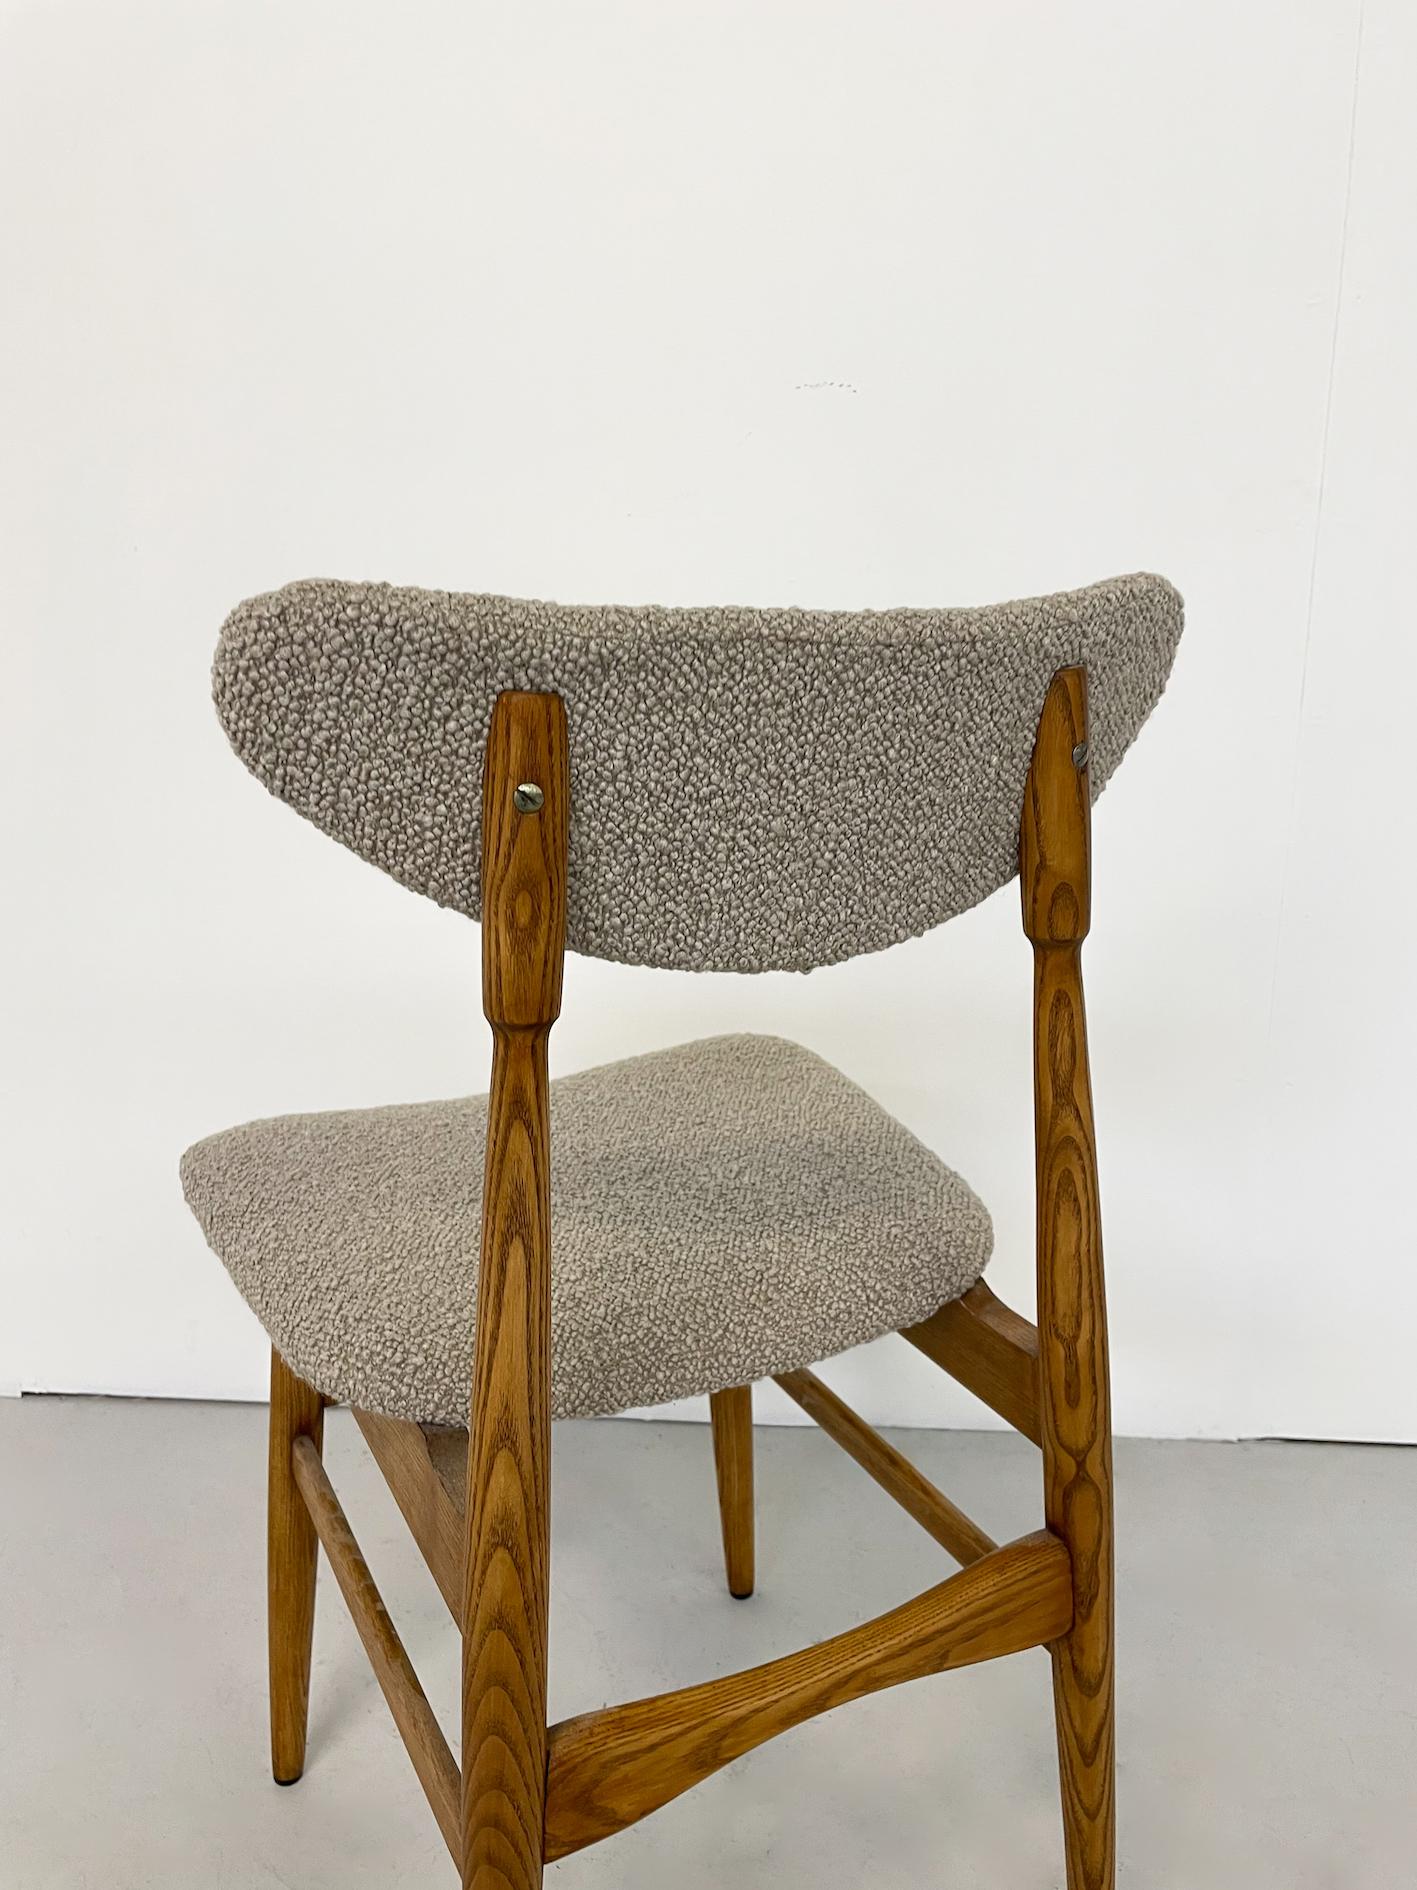 The Modernity Set of 12 Chairs, Italie, 1960s - New Upholstery en vente 6